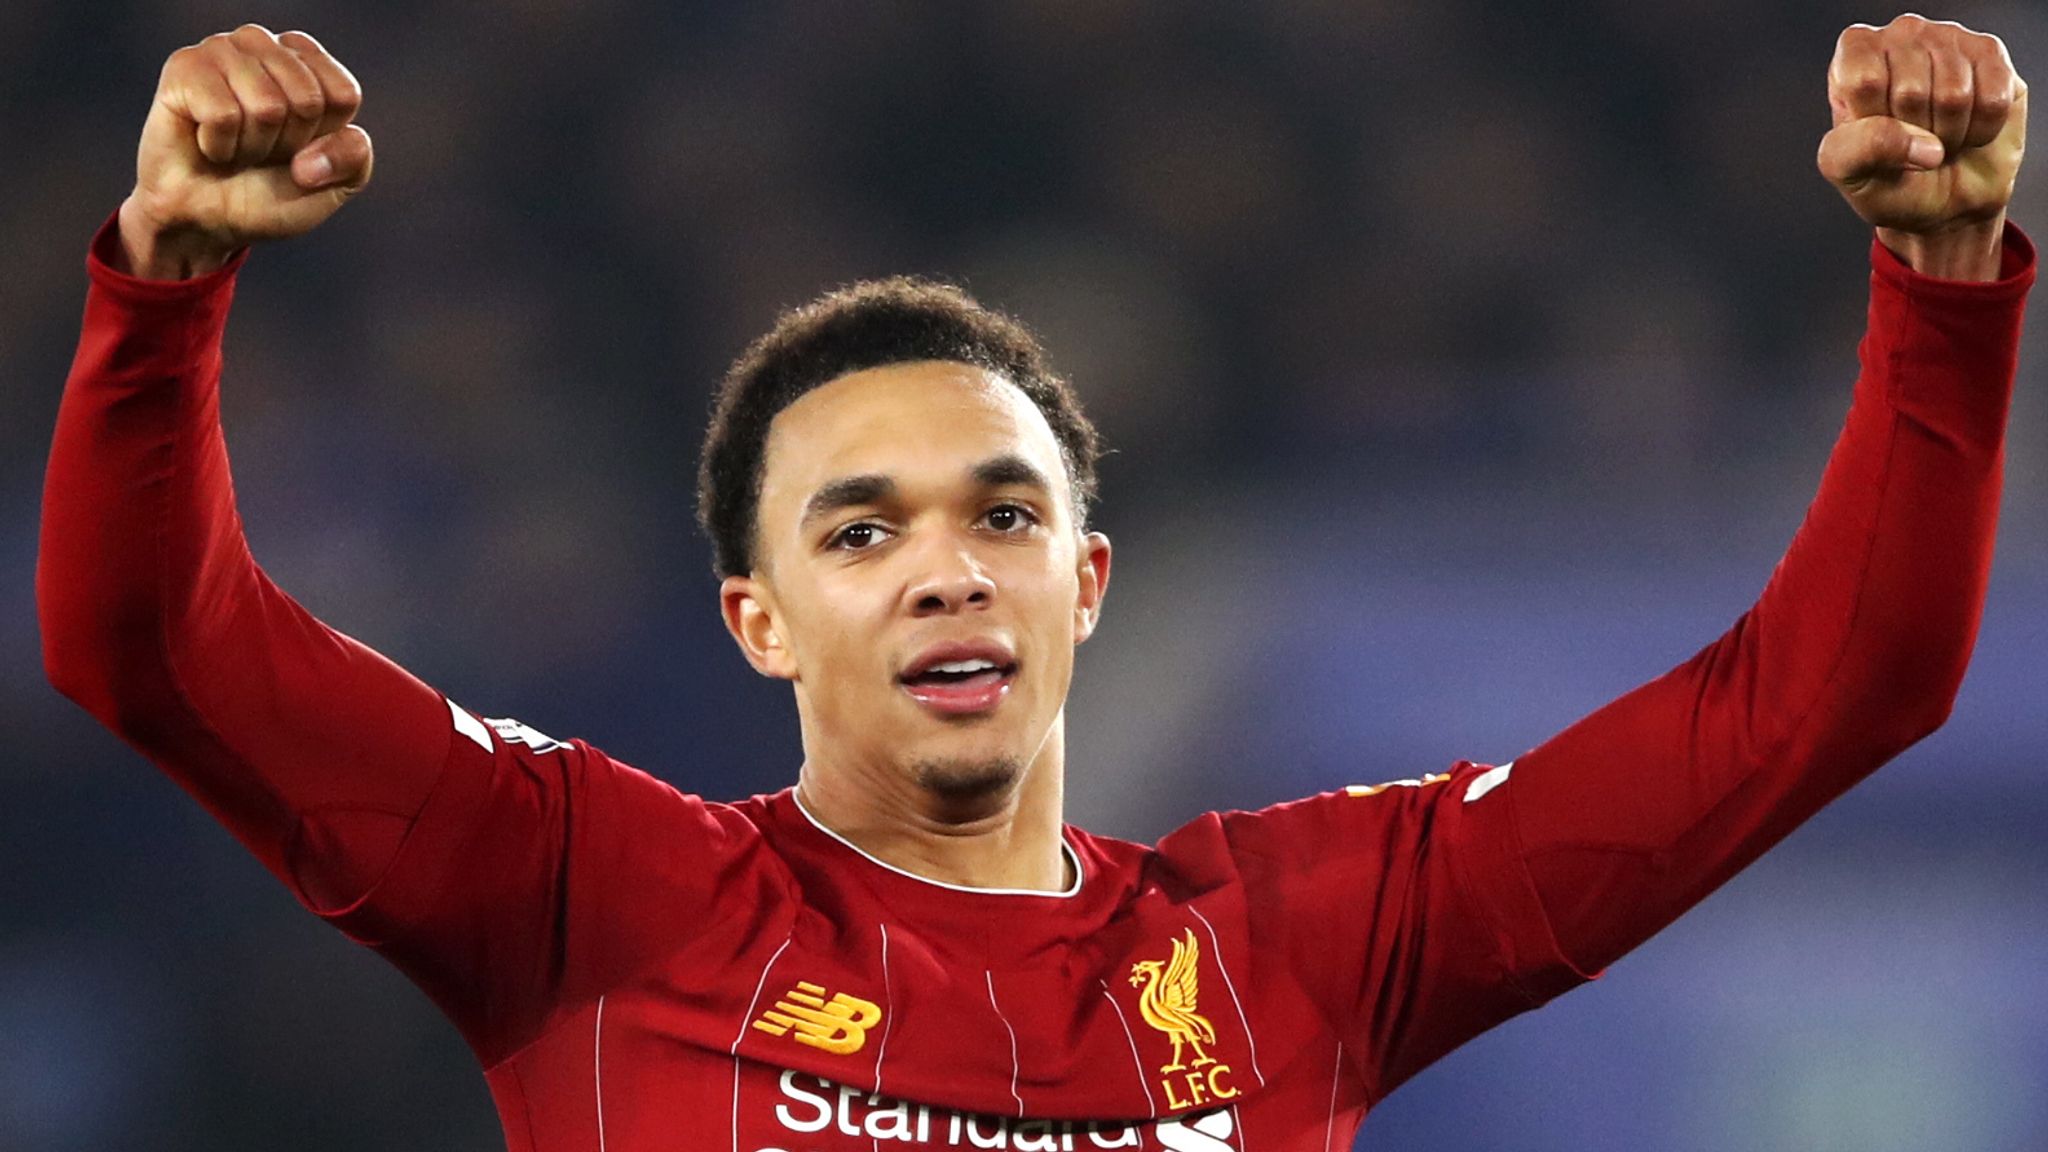 Trent Alexander-Arnold has inspired Liverpool youngsters, says ...